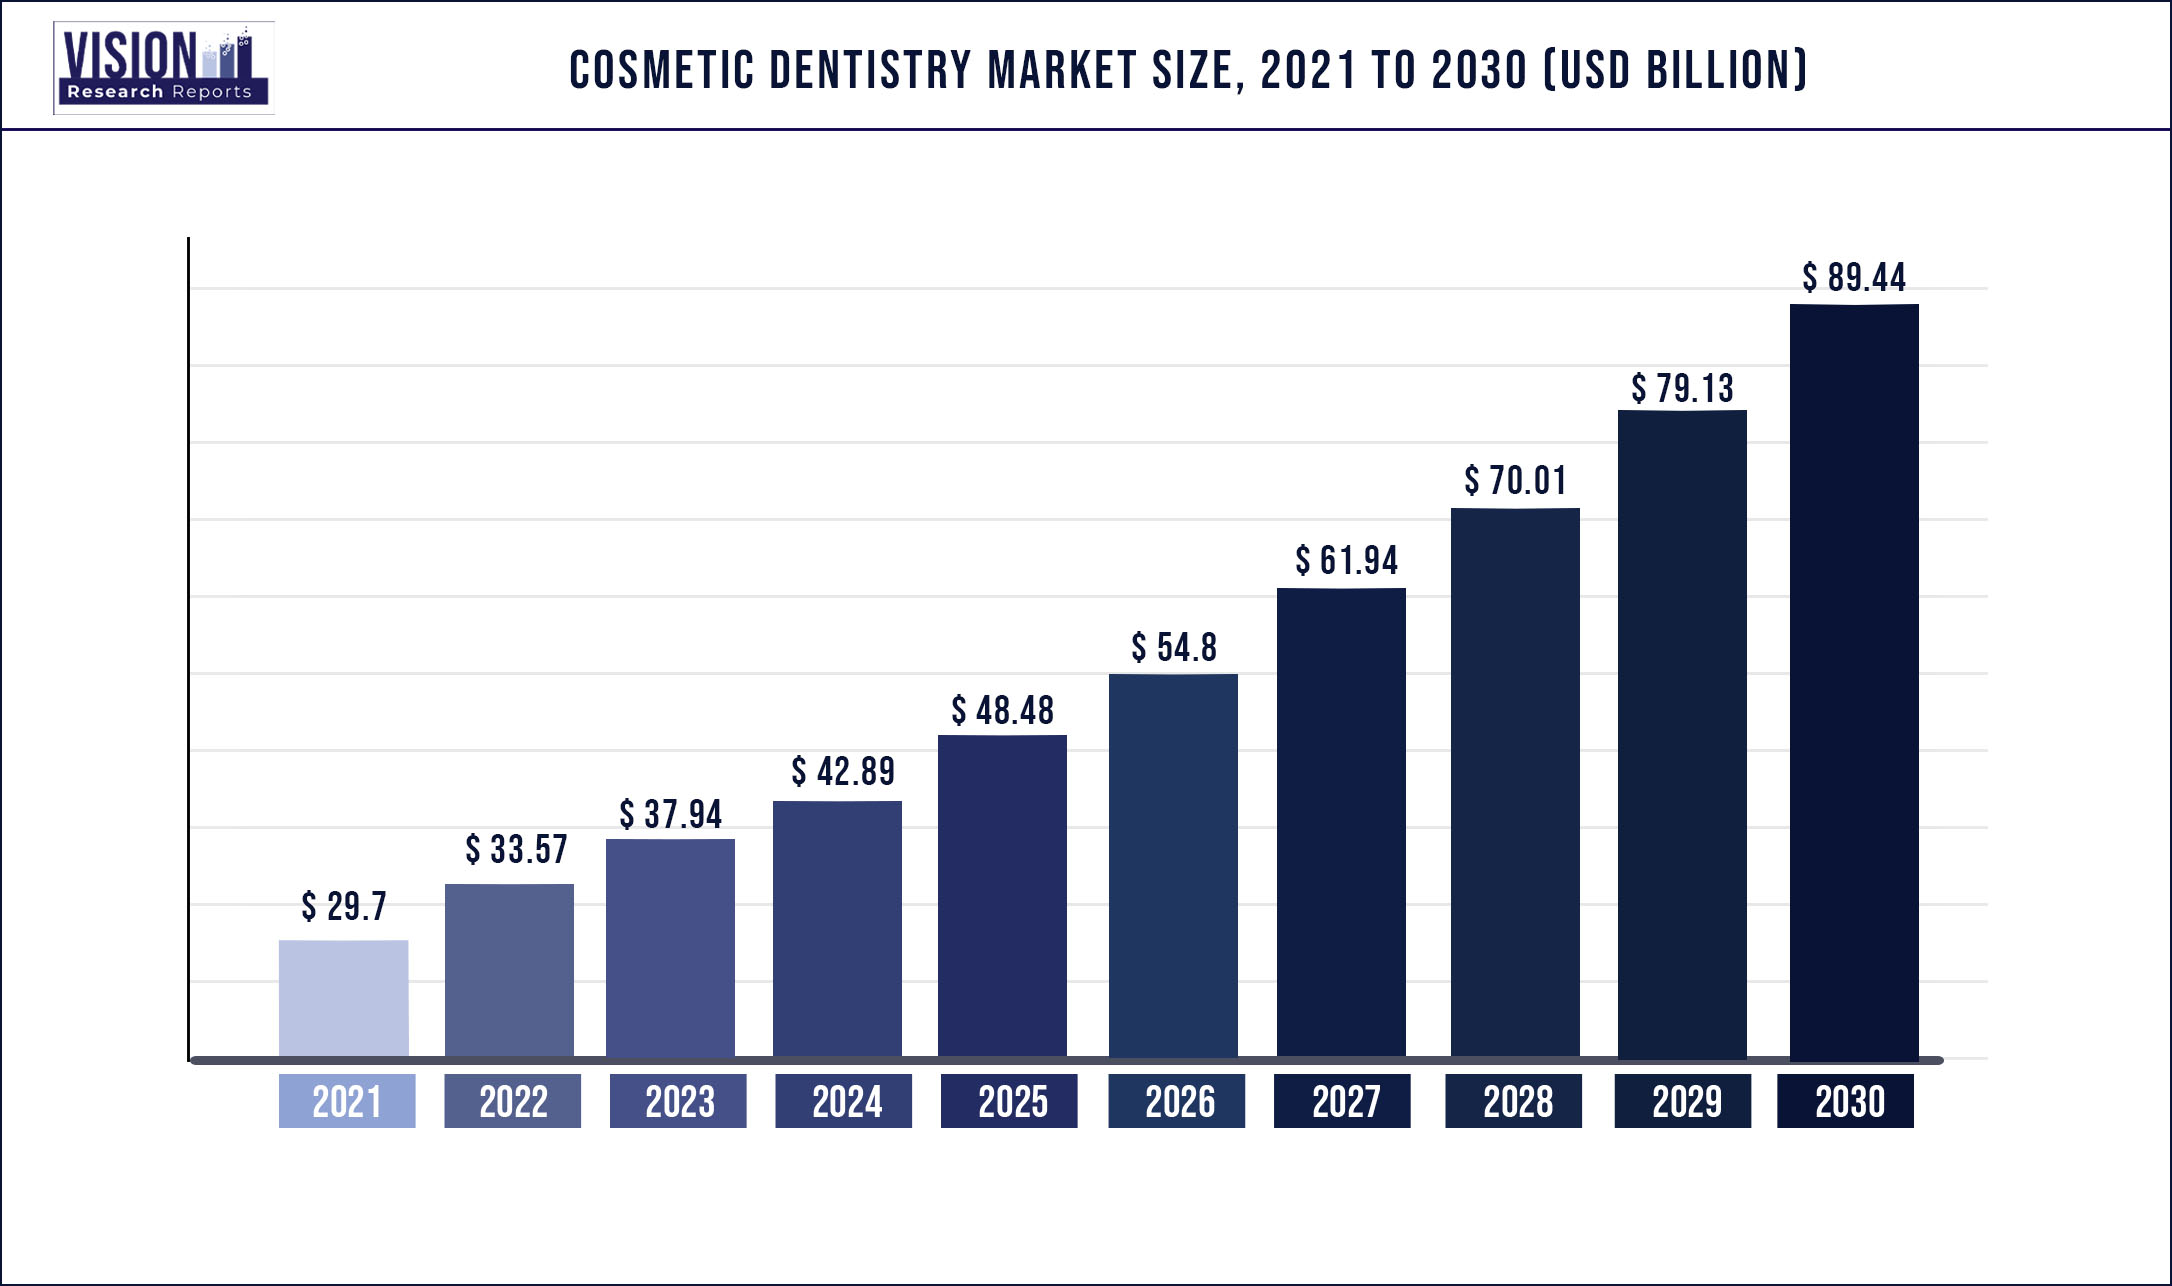 Cosmetic Dentistry Market Size 2021 to 2030